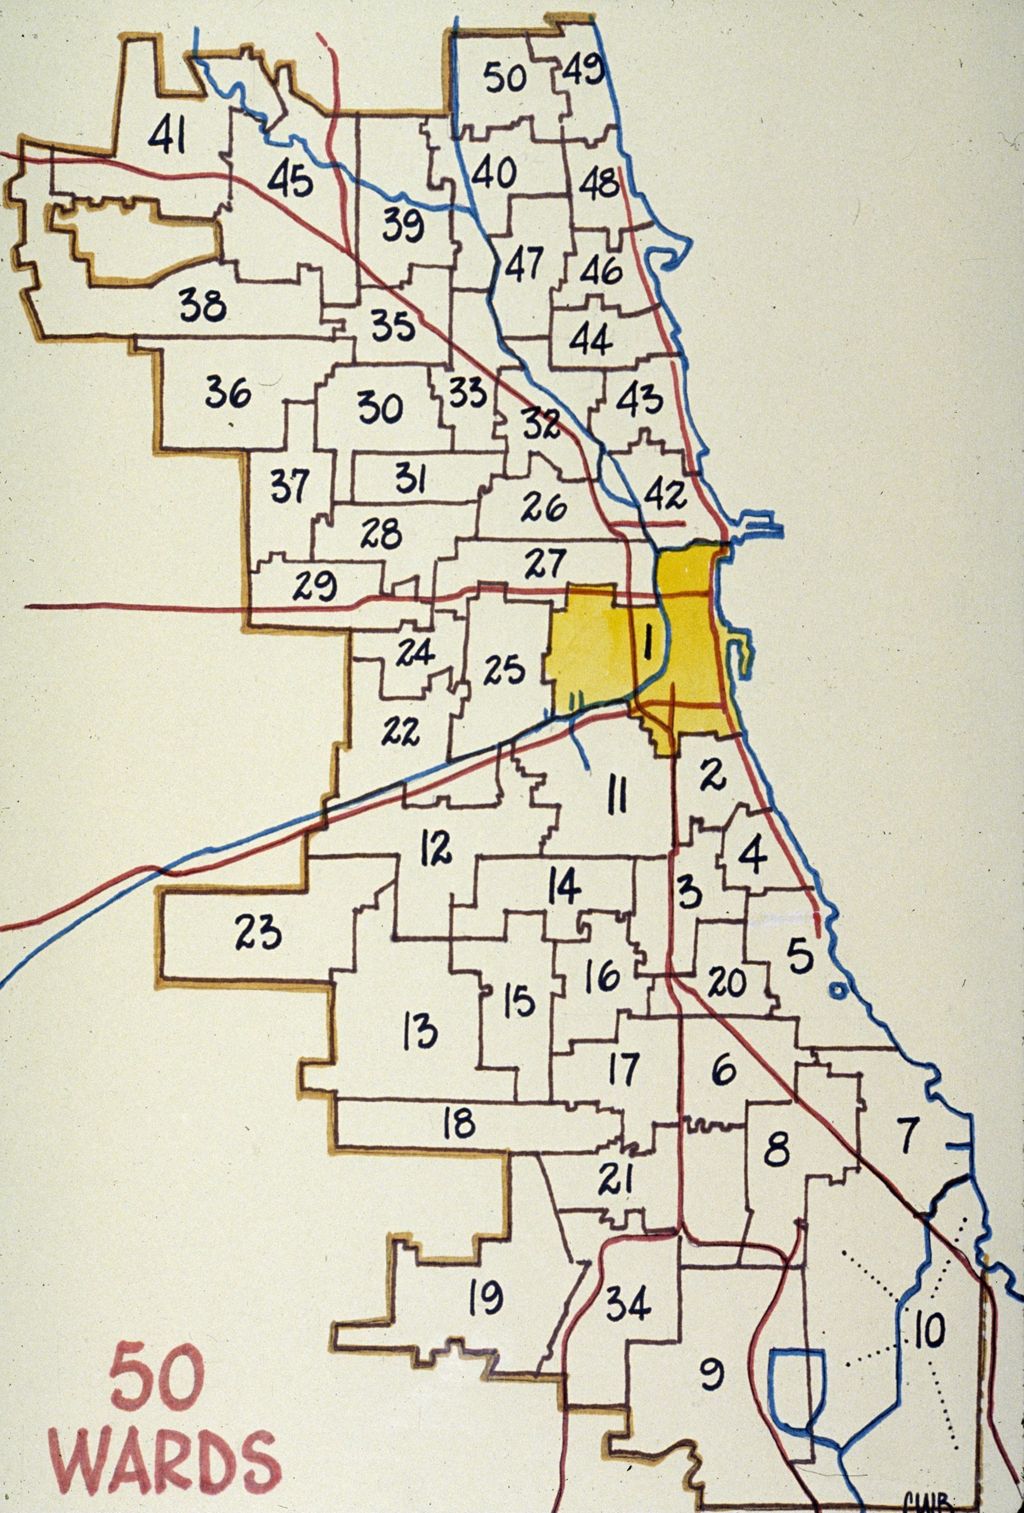 Miniature of Chicago ward map